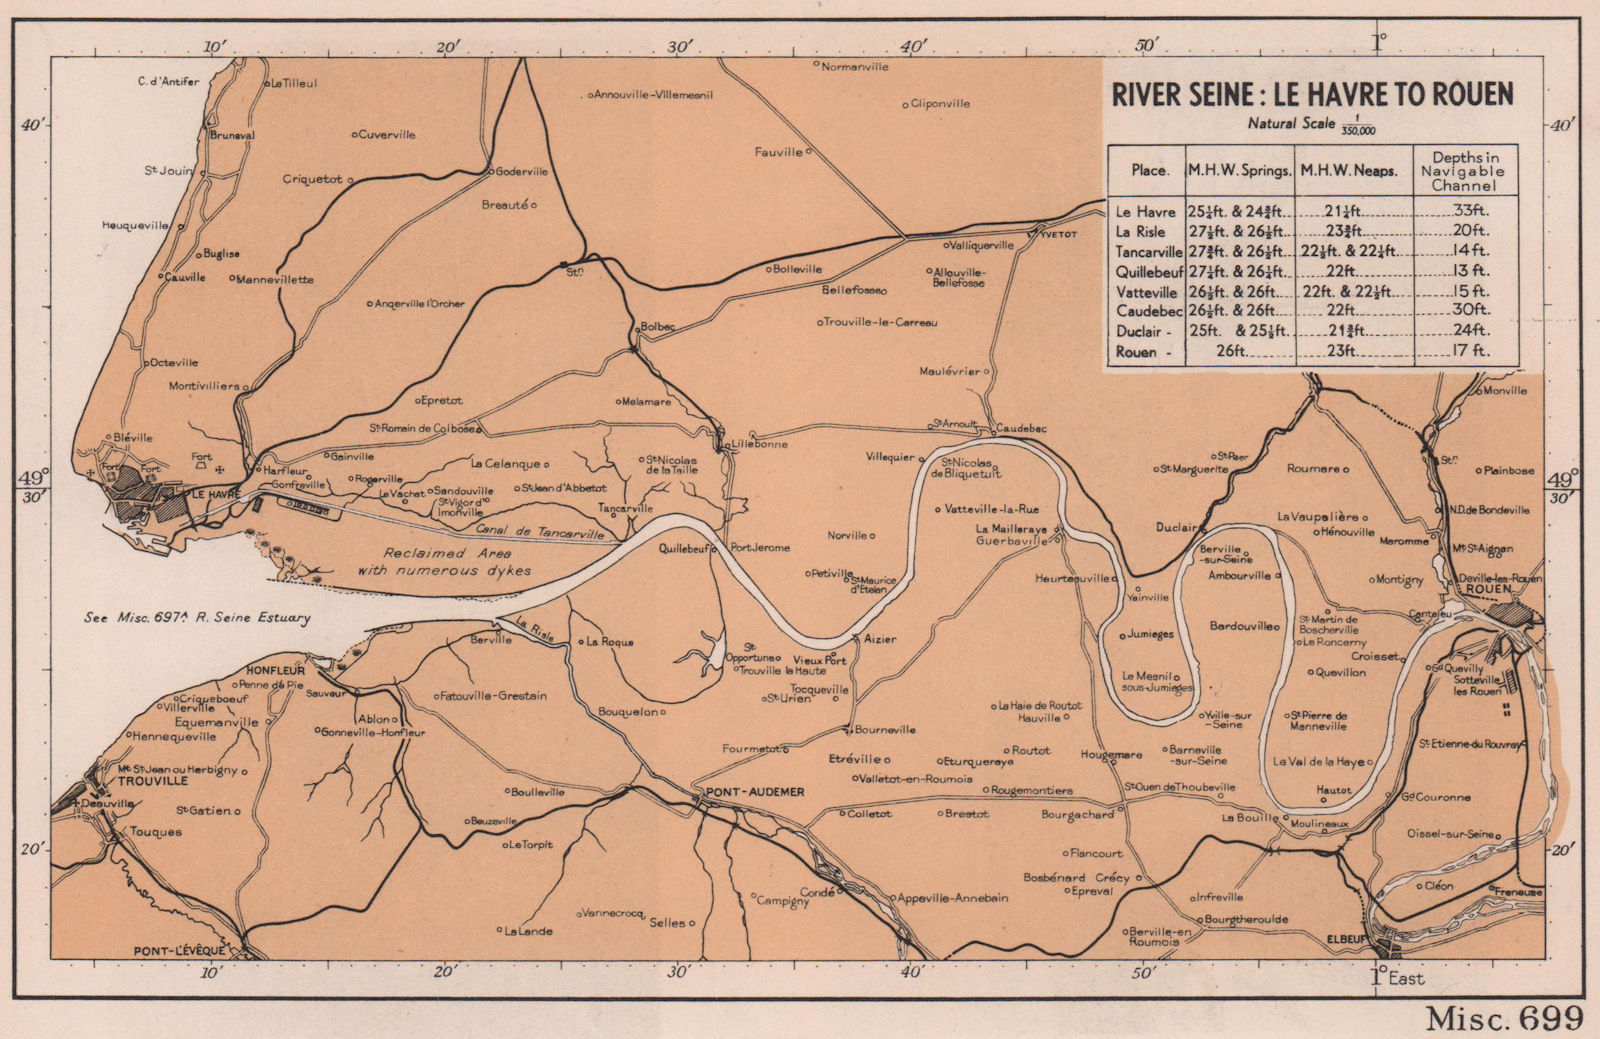 River Seine coast chart. Le Havre to Rouen. D-Day planning map. ADMIRALTY 1943